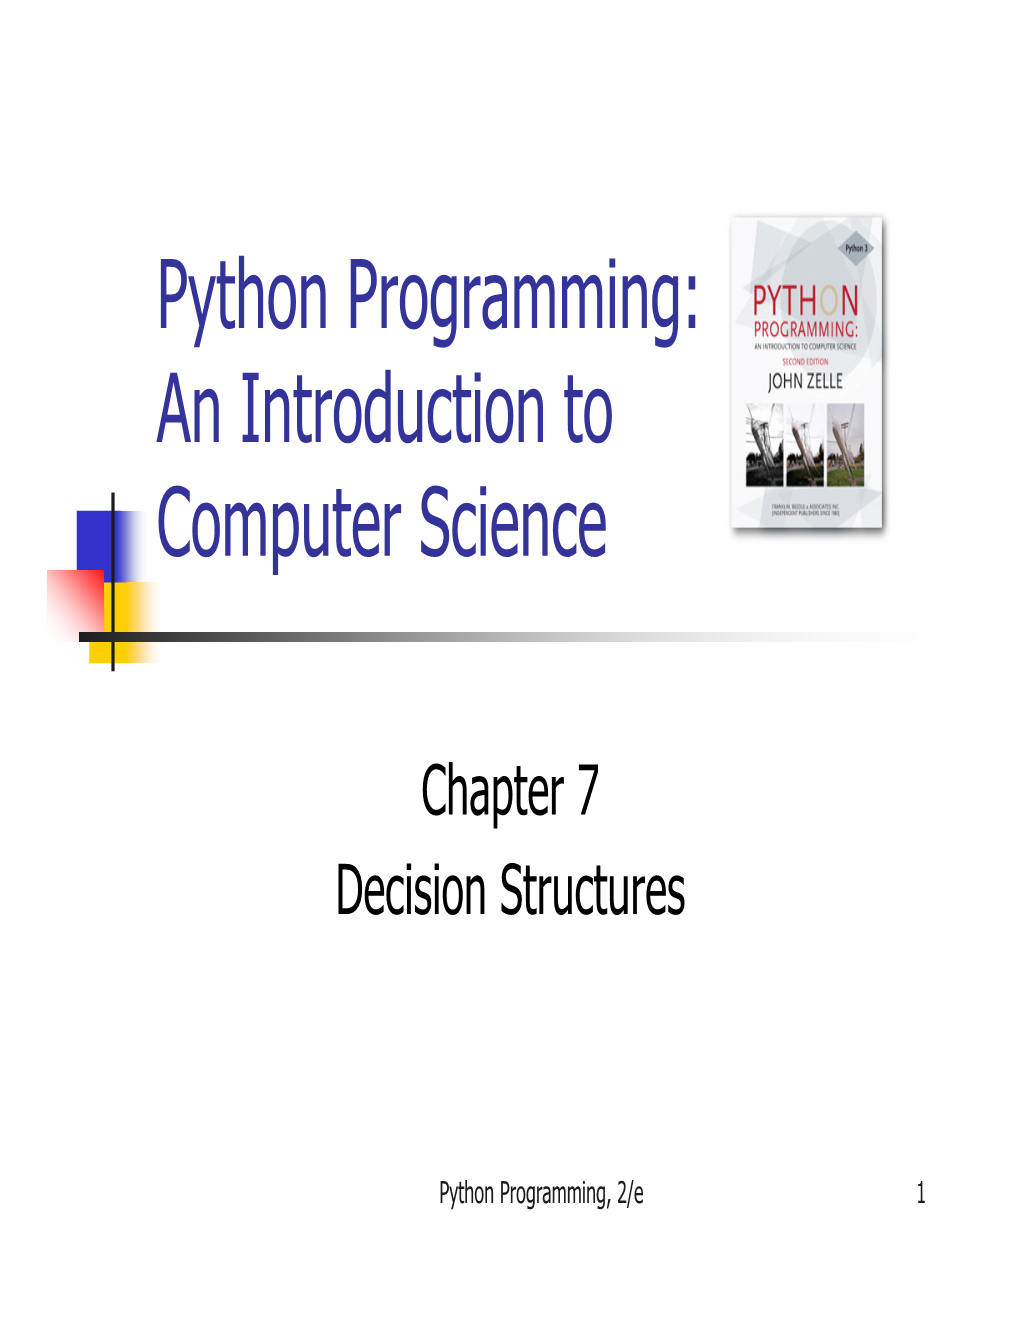 Python Programming: an Introduction to Computer Science